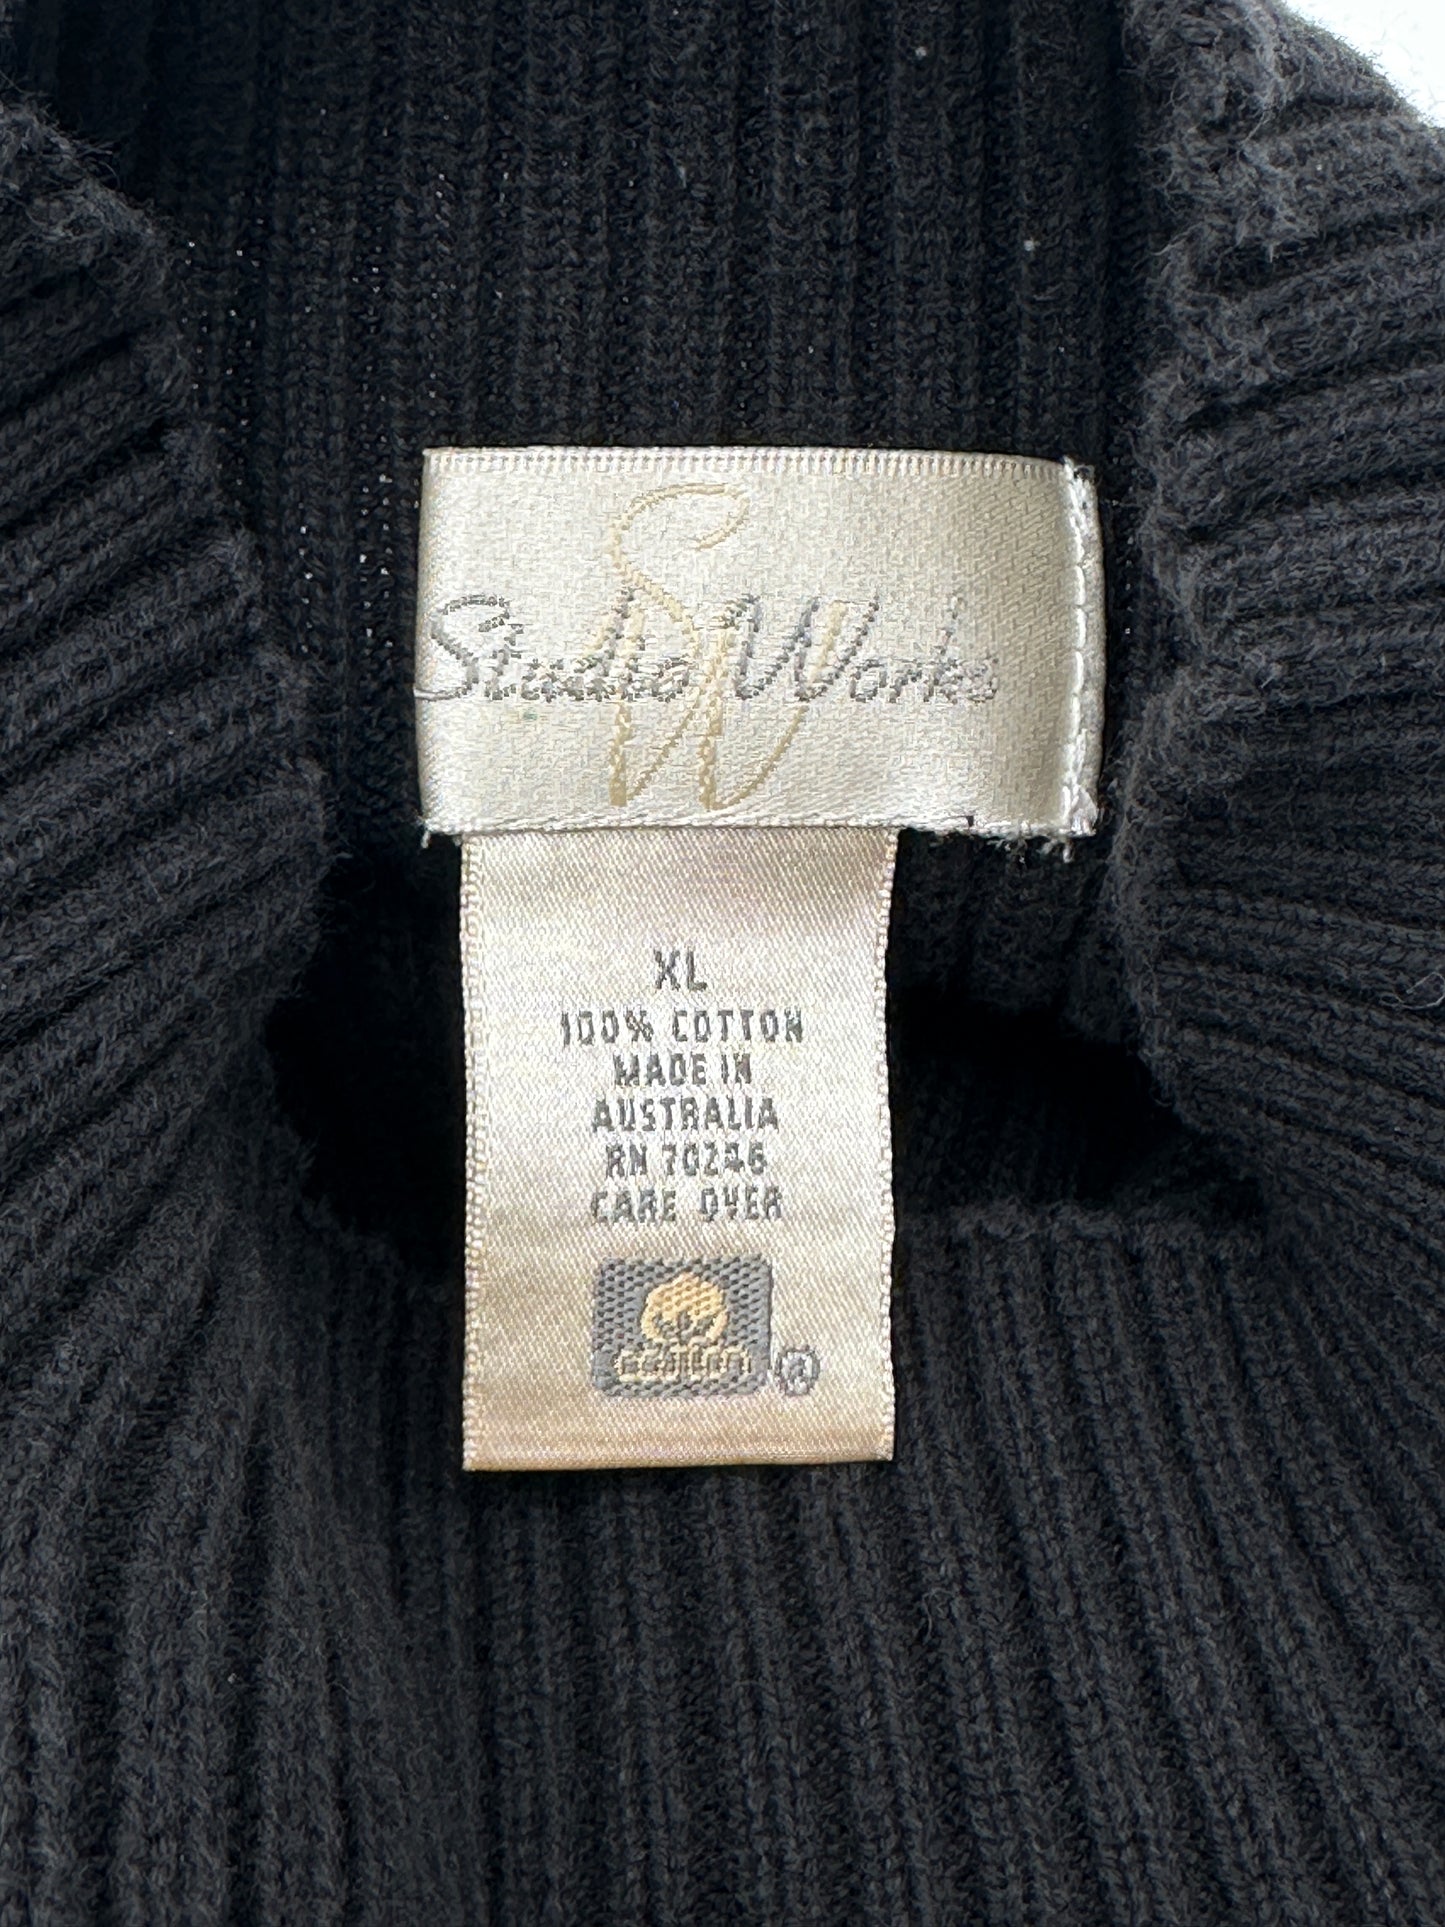 Studio Works Size XL Black Cotton Pullover Ribbed Sweater